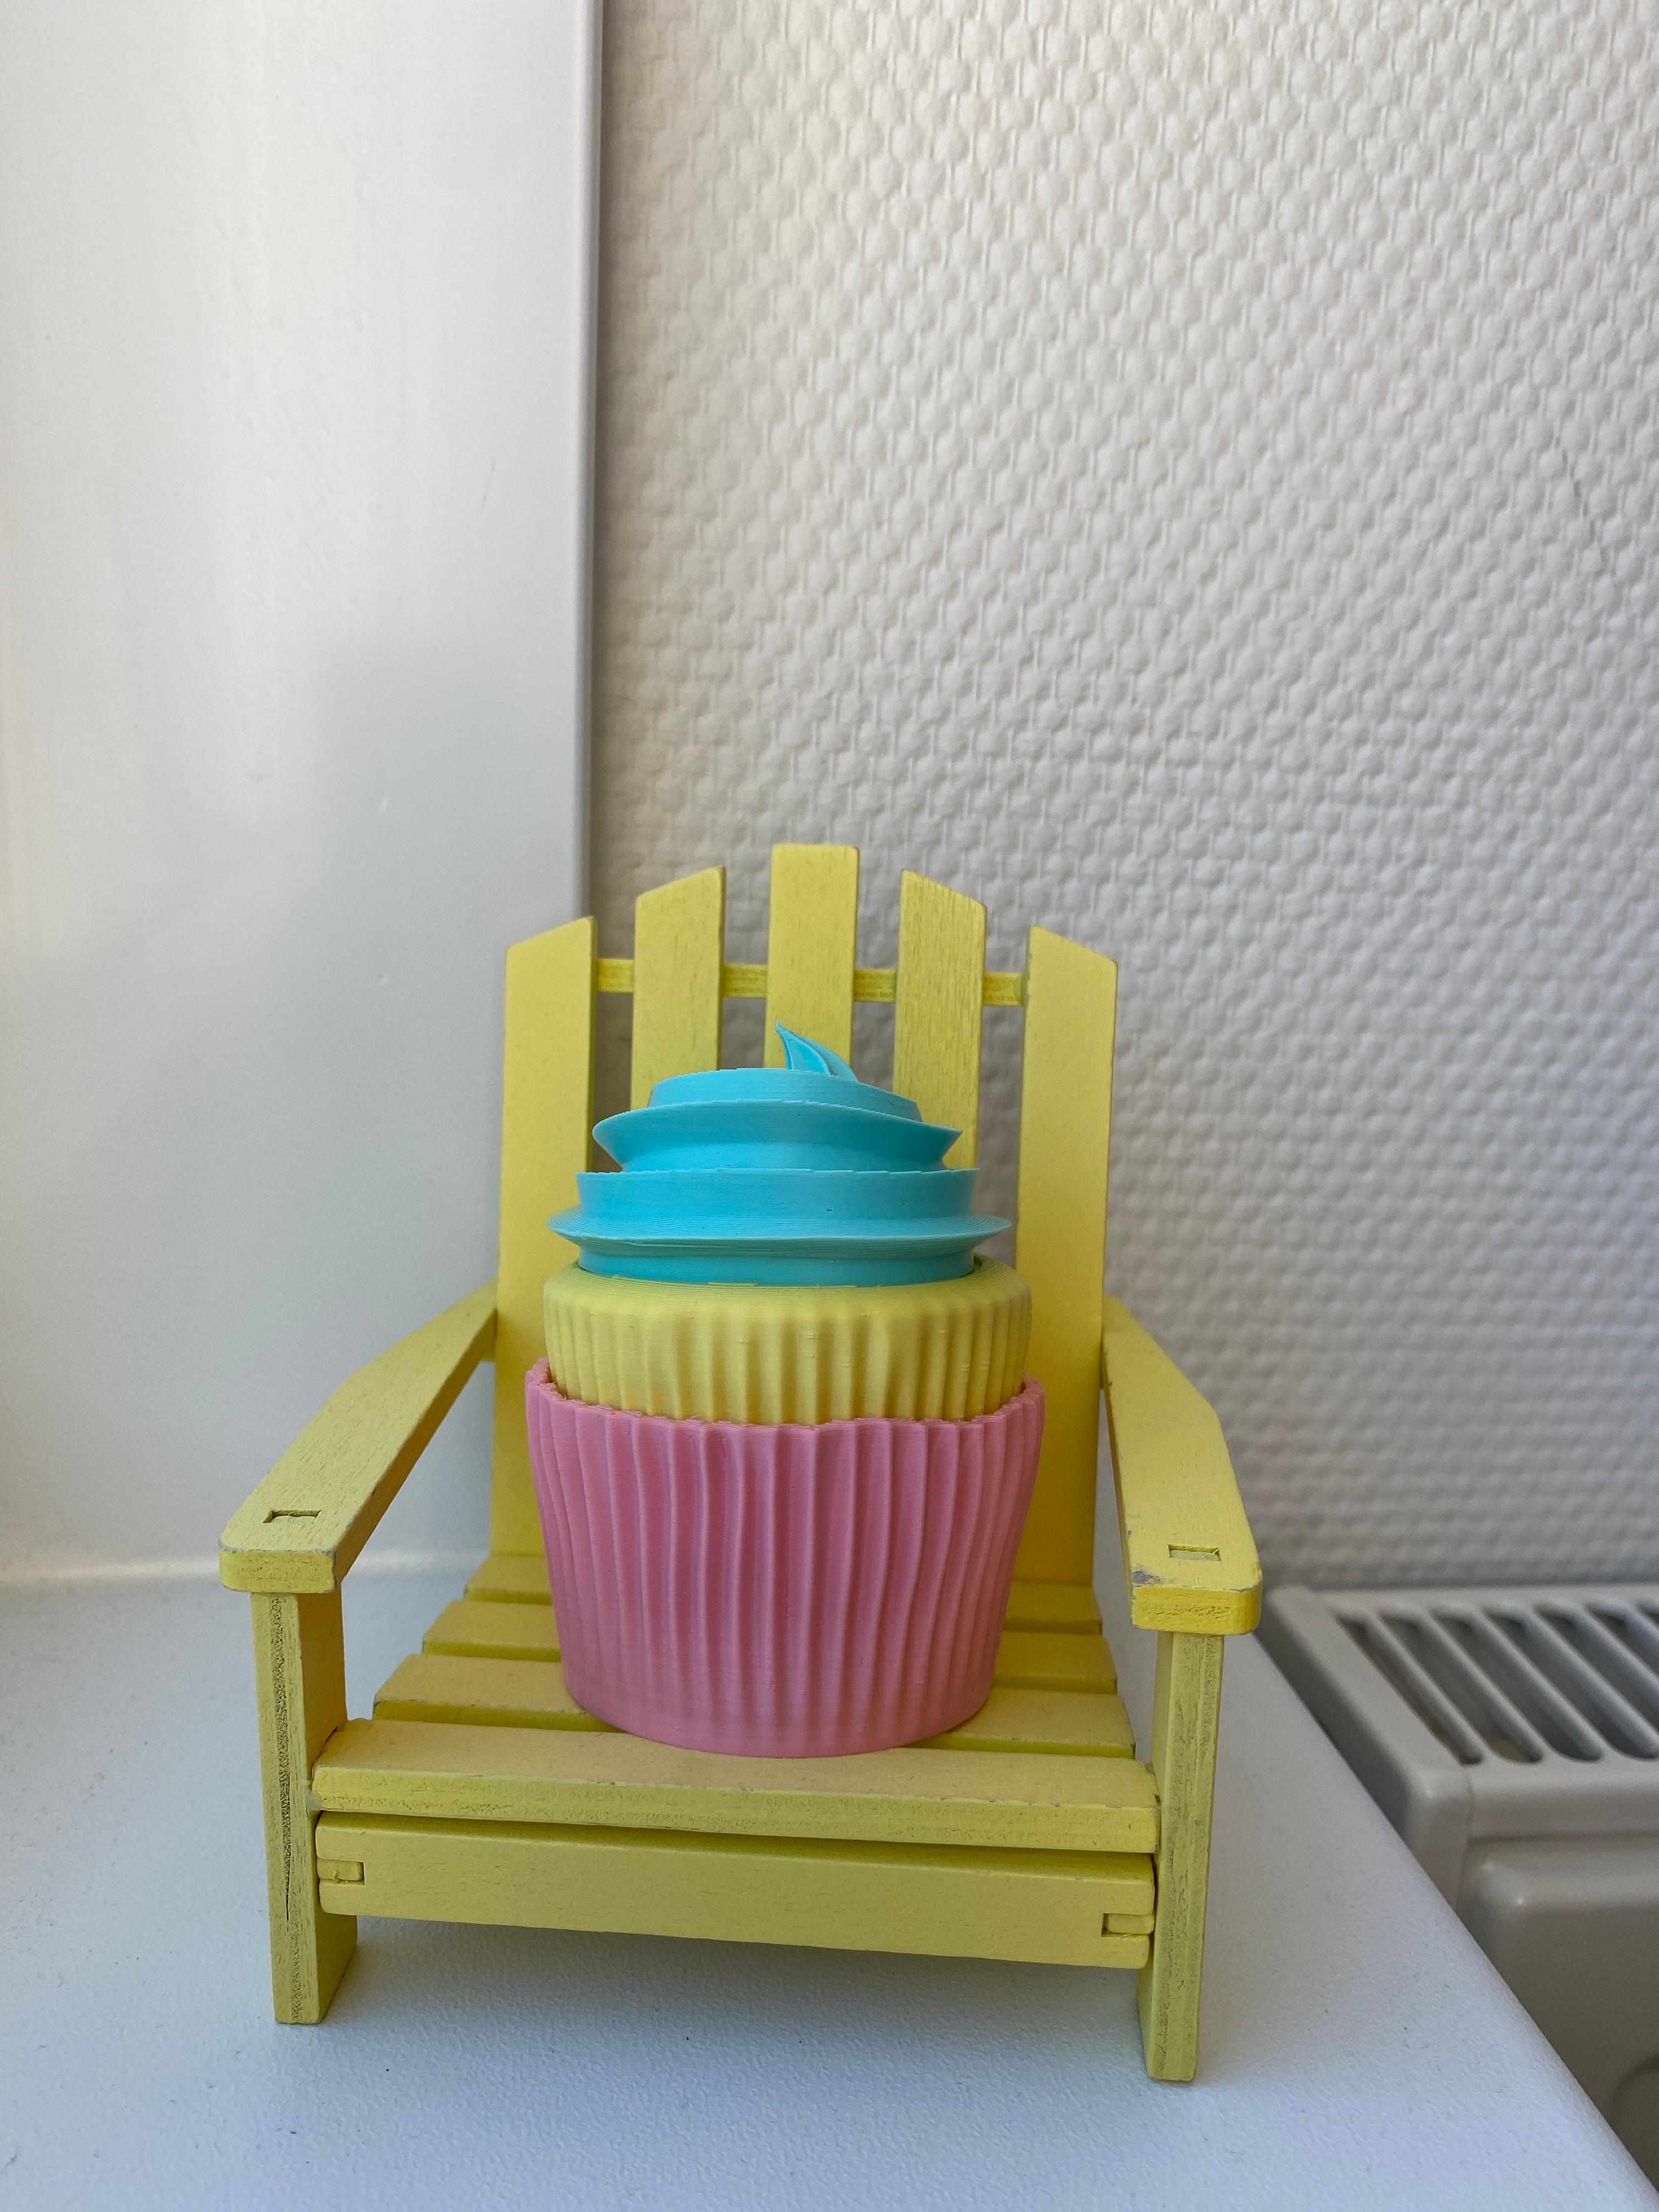 Cupcake #1 - Happy birthday Randomize! 🧁🥳😘
This was my first print with my Prusa mini!
Best colorful delicious cupcake ever! 
Printed with the pastelpack 
'bubblegum pink'
'banana yellow'
'sweet mint'
Printed with 0.15 quality.
Enjoy your cupcake🧁 - 3d model